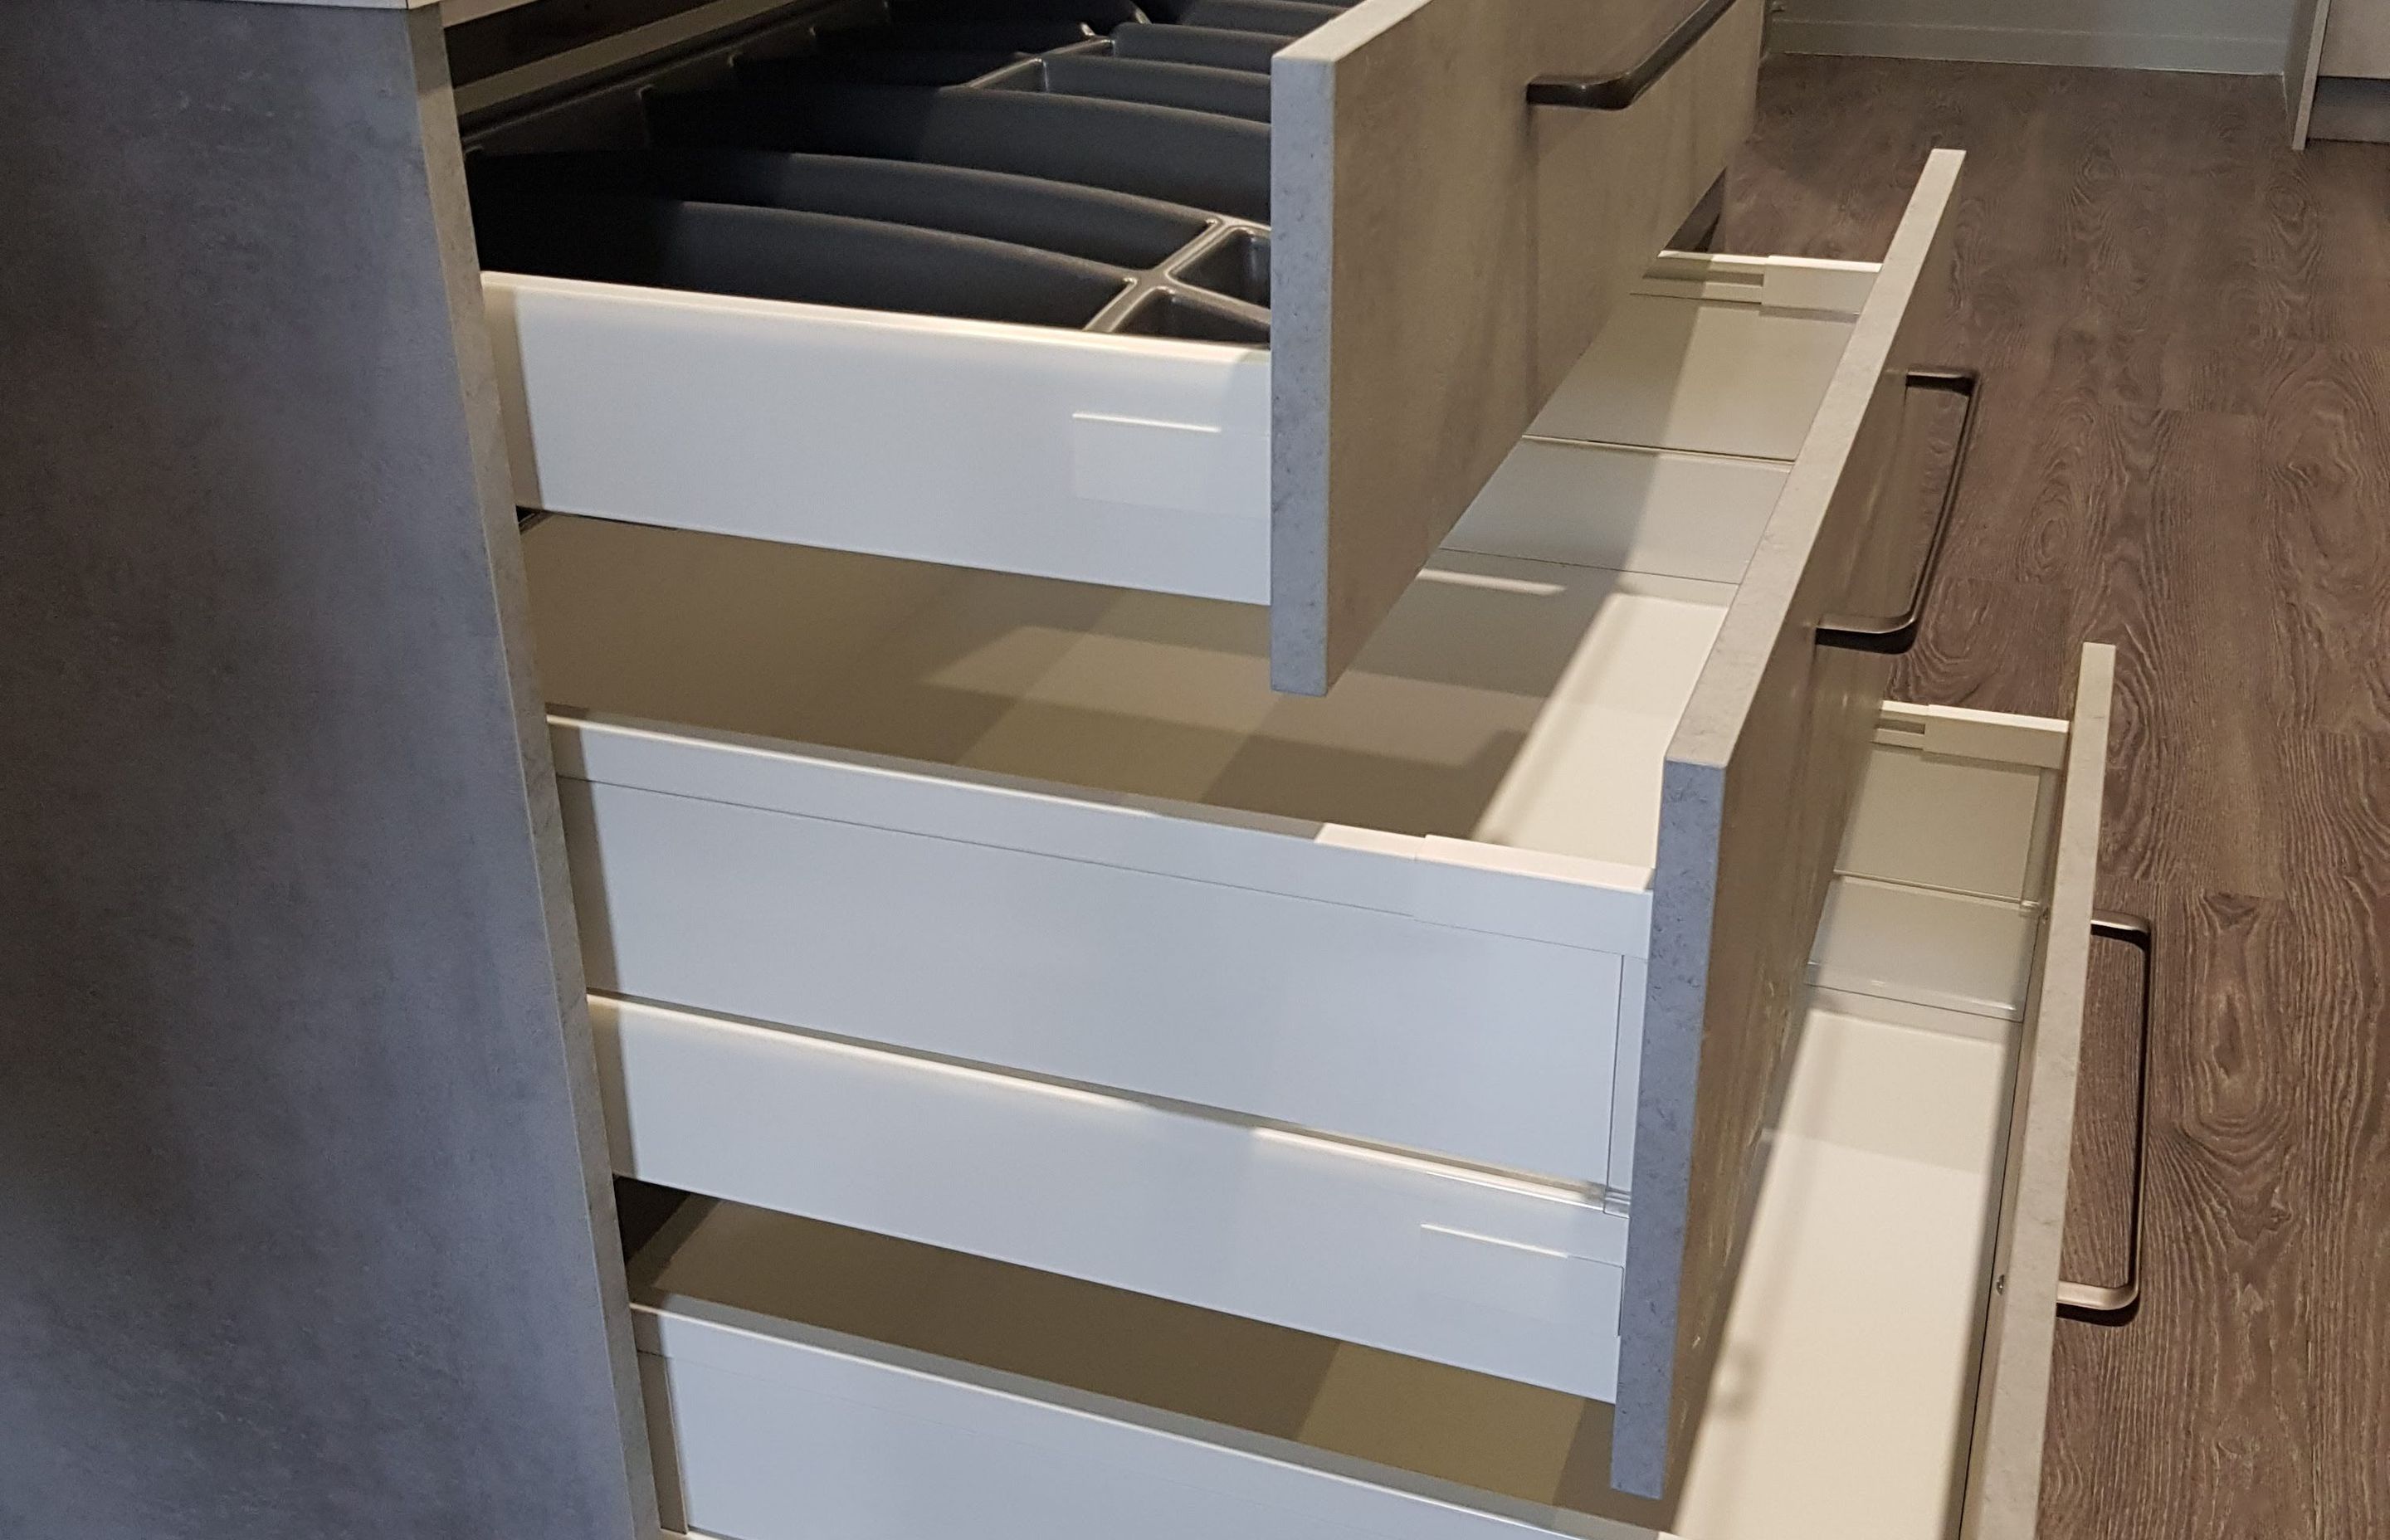 Harn Ritma Soft Close Drawers In Contemporary Square Railed Style and White. Also Available in Umbra Grey and with Round Side Rails